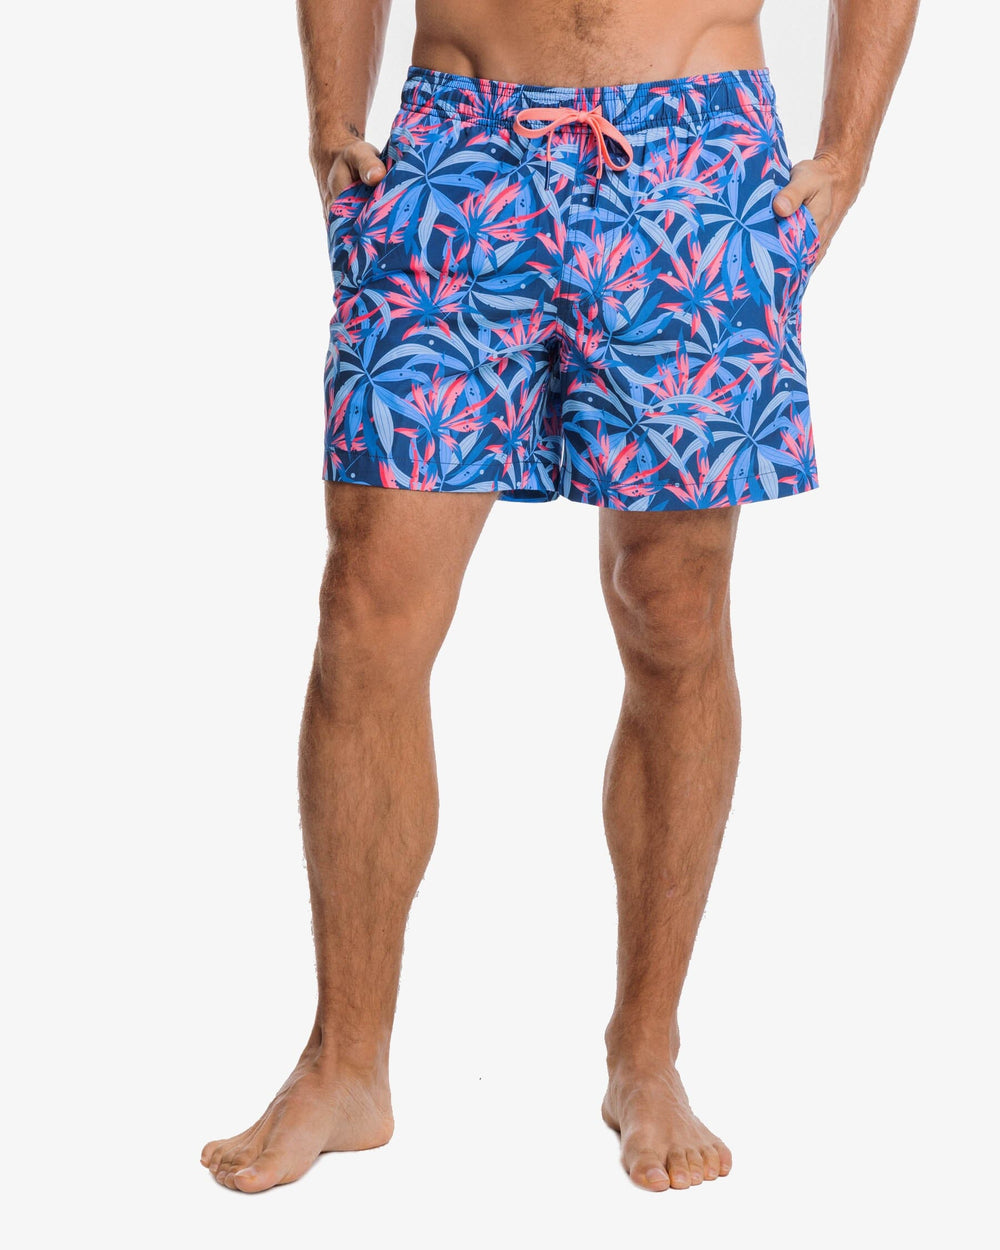 The front view of the Southern Tide Tropical Blooms Printed Swim Trunk by Southern Tide - Aged Denim